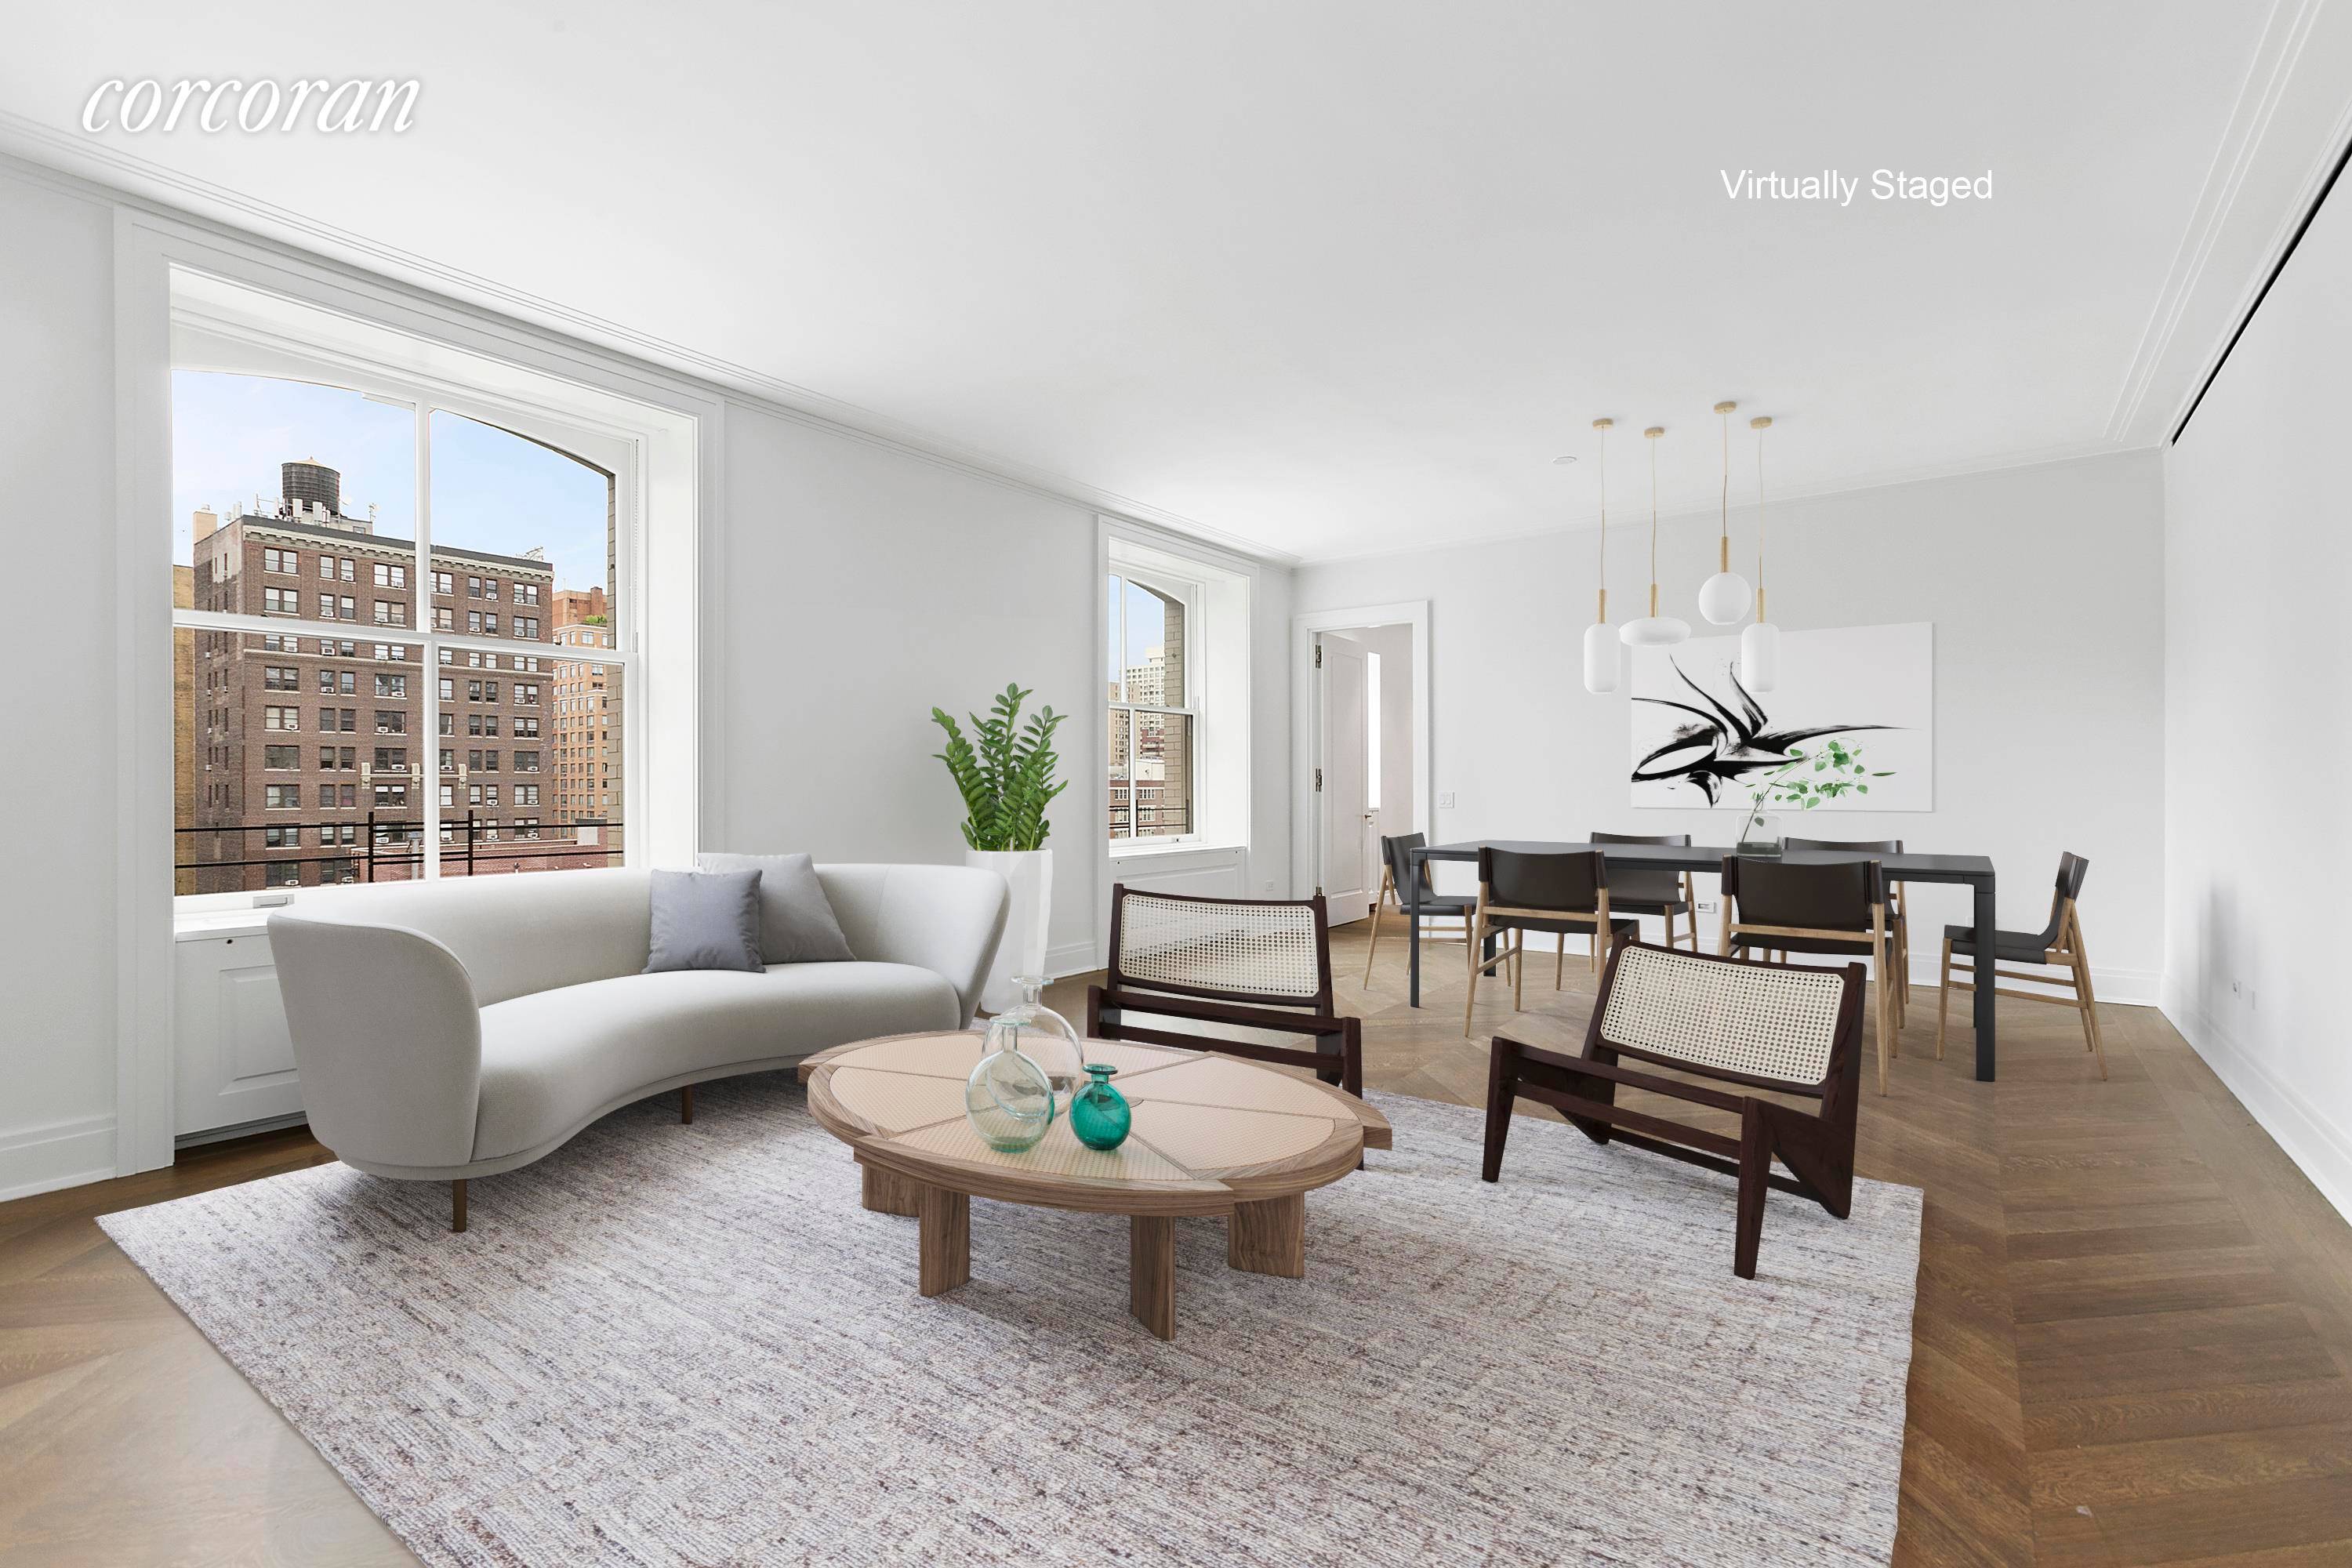 Presenting a unique opportunity to rent a never lived in and impeccably renovated home at the Belnord one of the Upper West Side's most spectacular pre War buildings that has ...